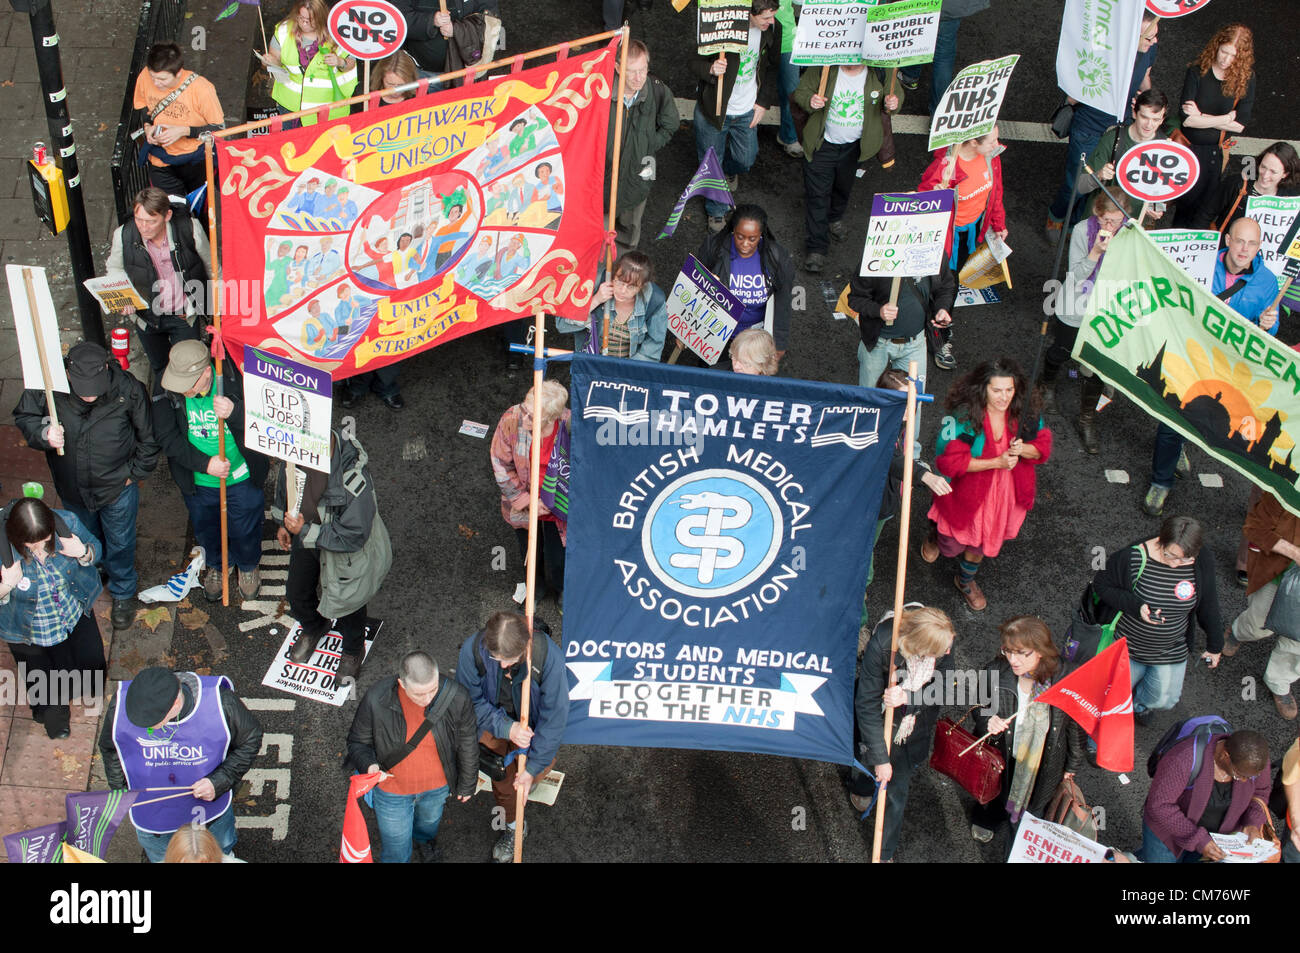 20/10/2012, London UK. Union banners fly as the TUC stage a mass protest against the UK government's austerity cuts. A march through central London culminated in a rally in Hyde Park. Stock Photo